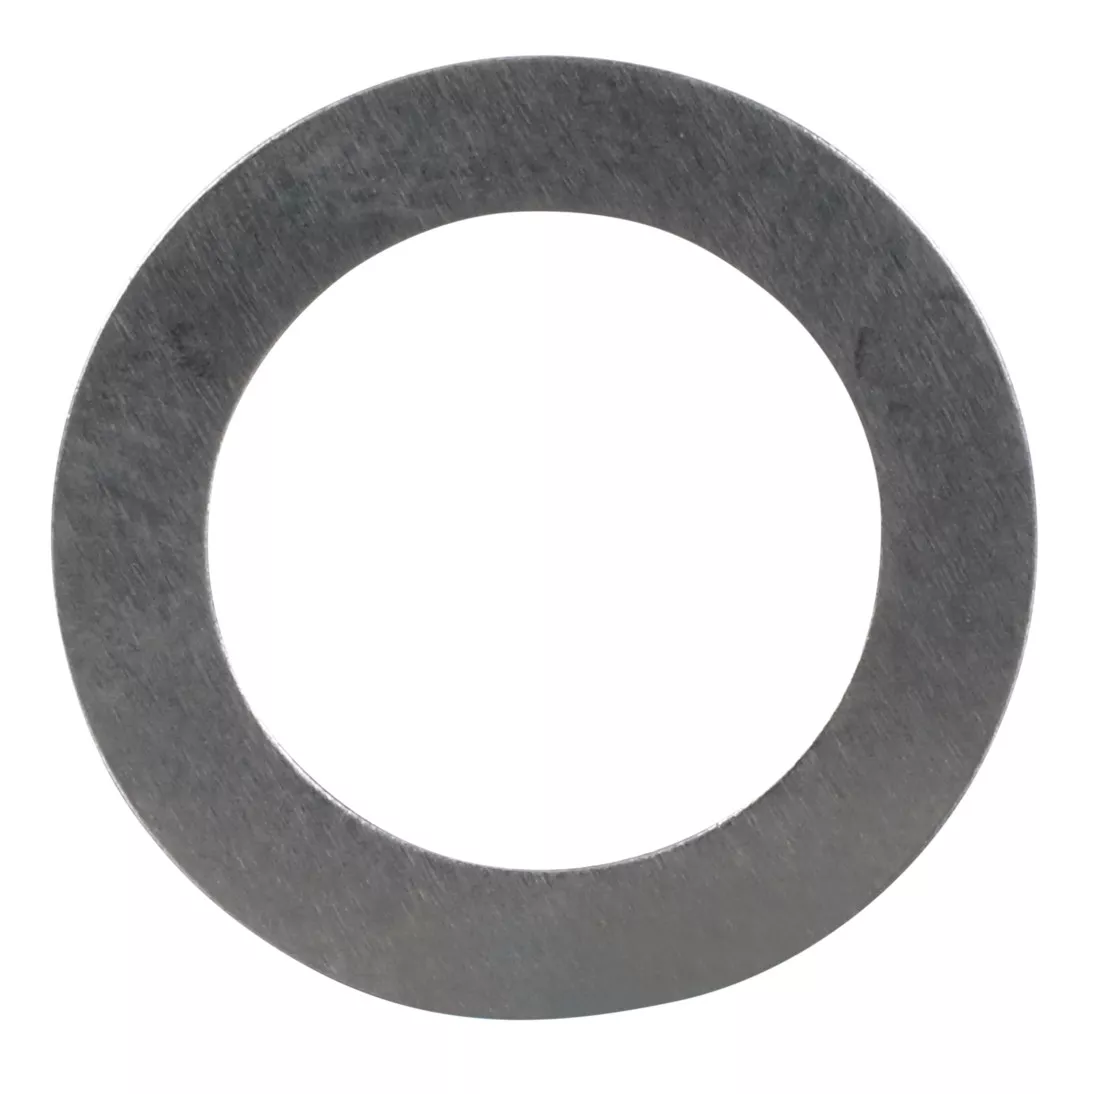 3M™ Spacer A0016, 0.2 Thick